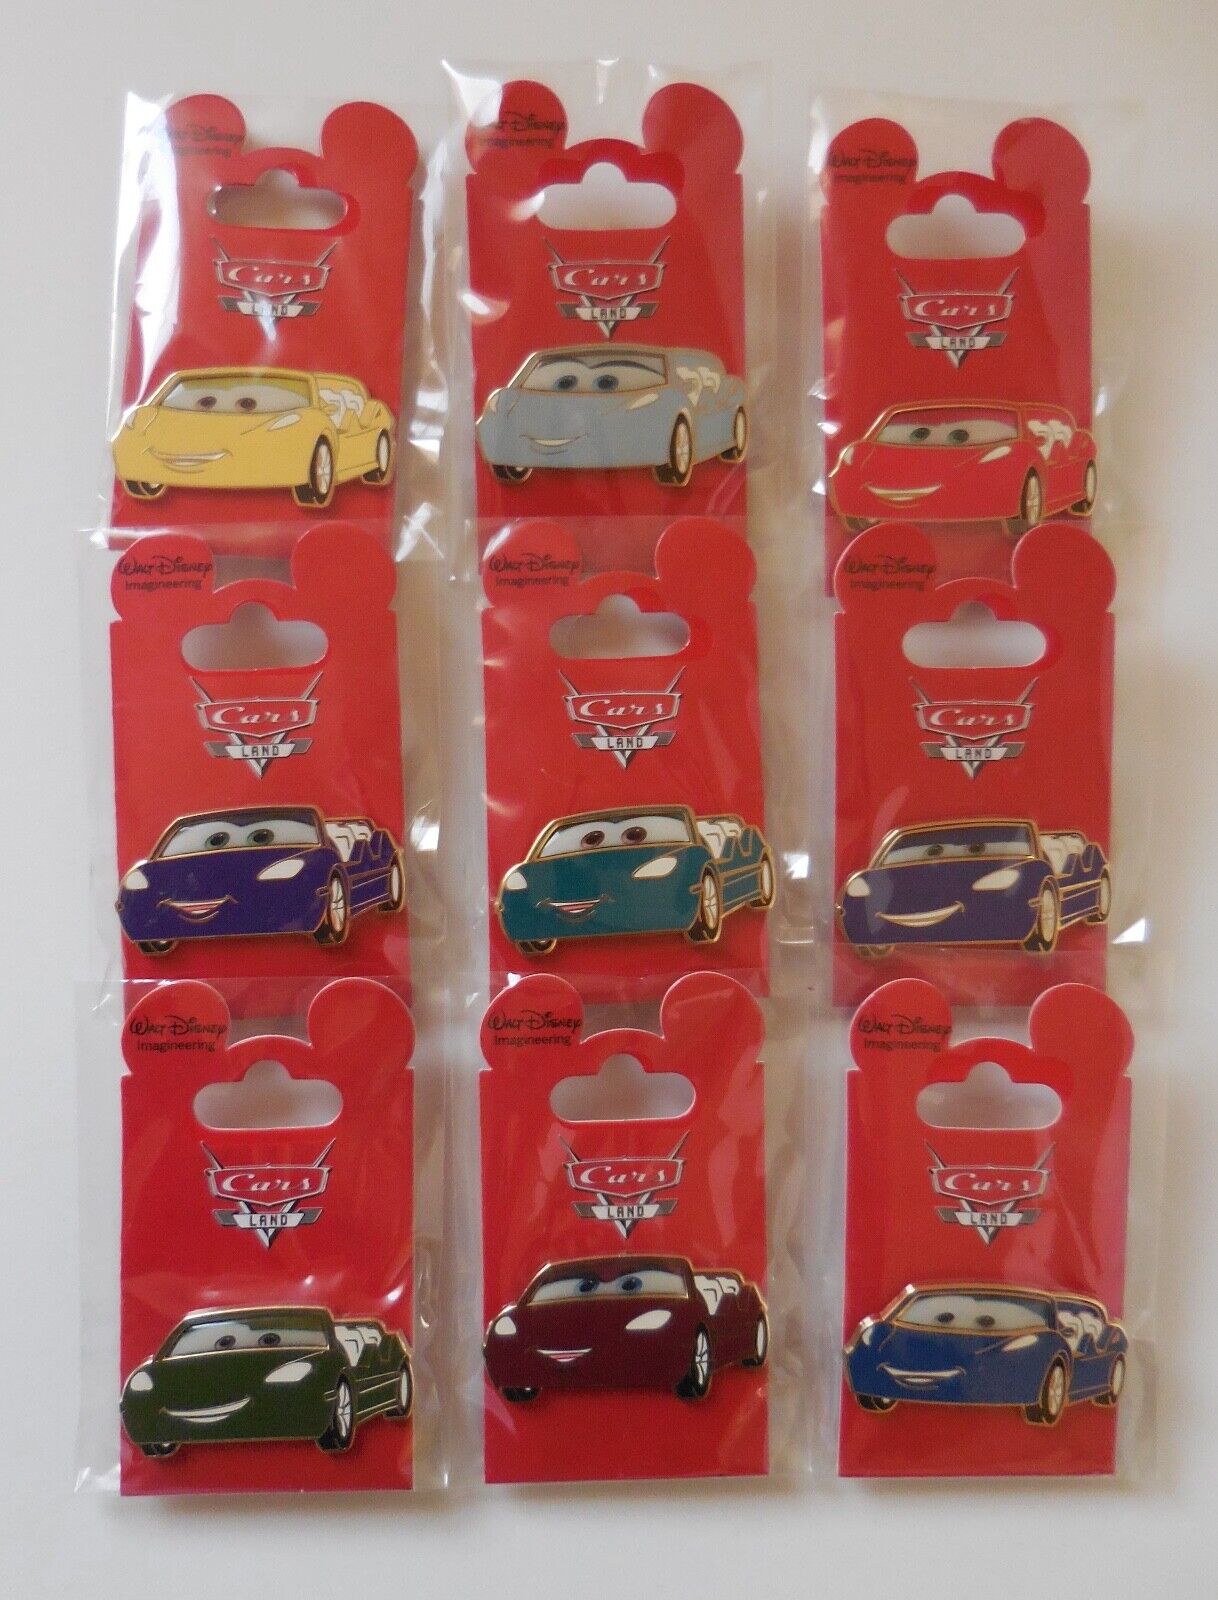 Disney Pin WDI DLR DCA Attraction Radiator Spring Racers Set of 9 Pins LE200 